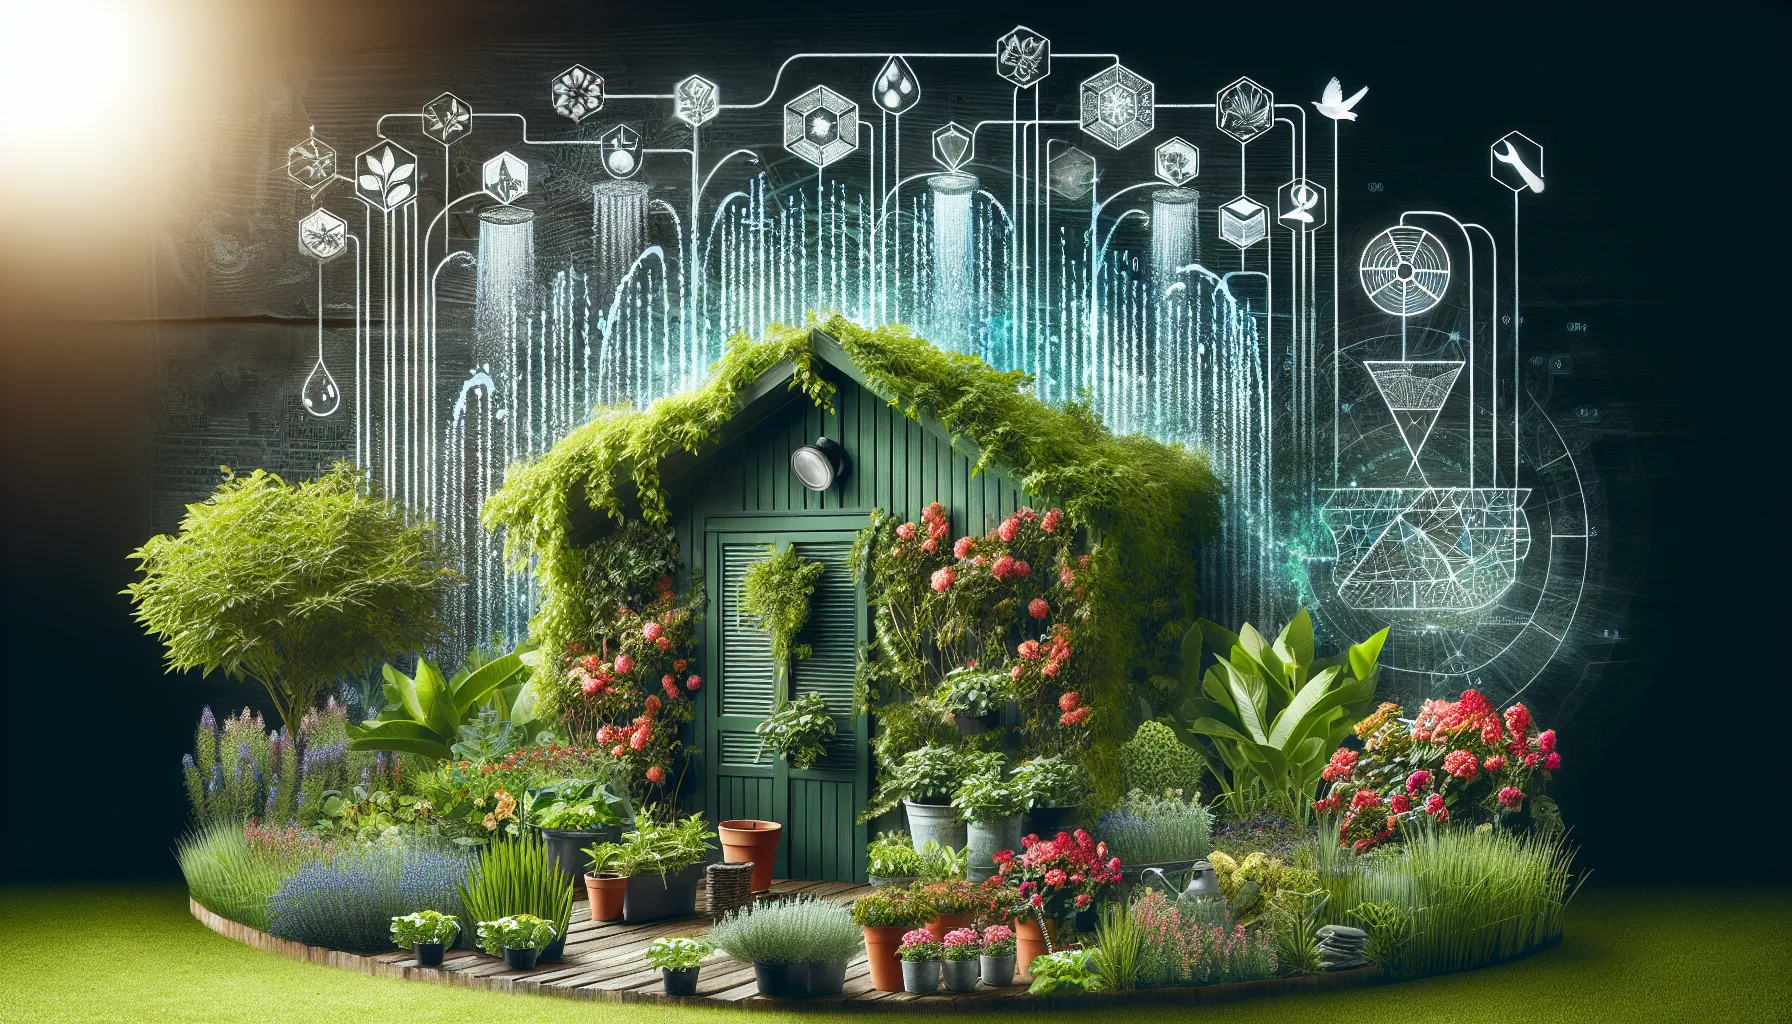 A lush garden surrounding a green shed is shown with holographic overlays depicting various garden care and irrigation systems.